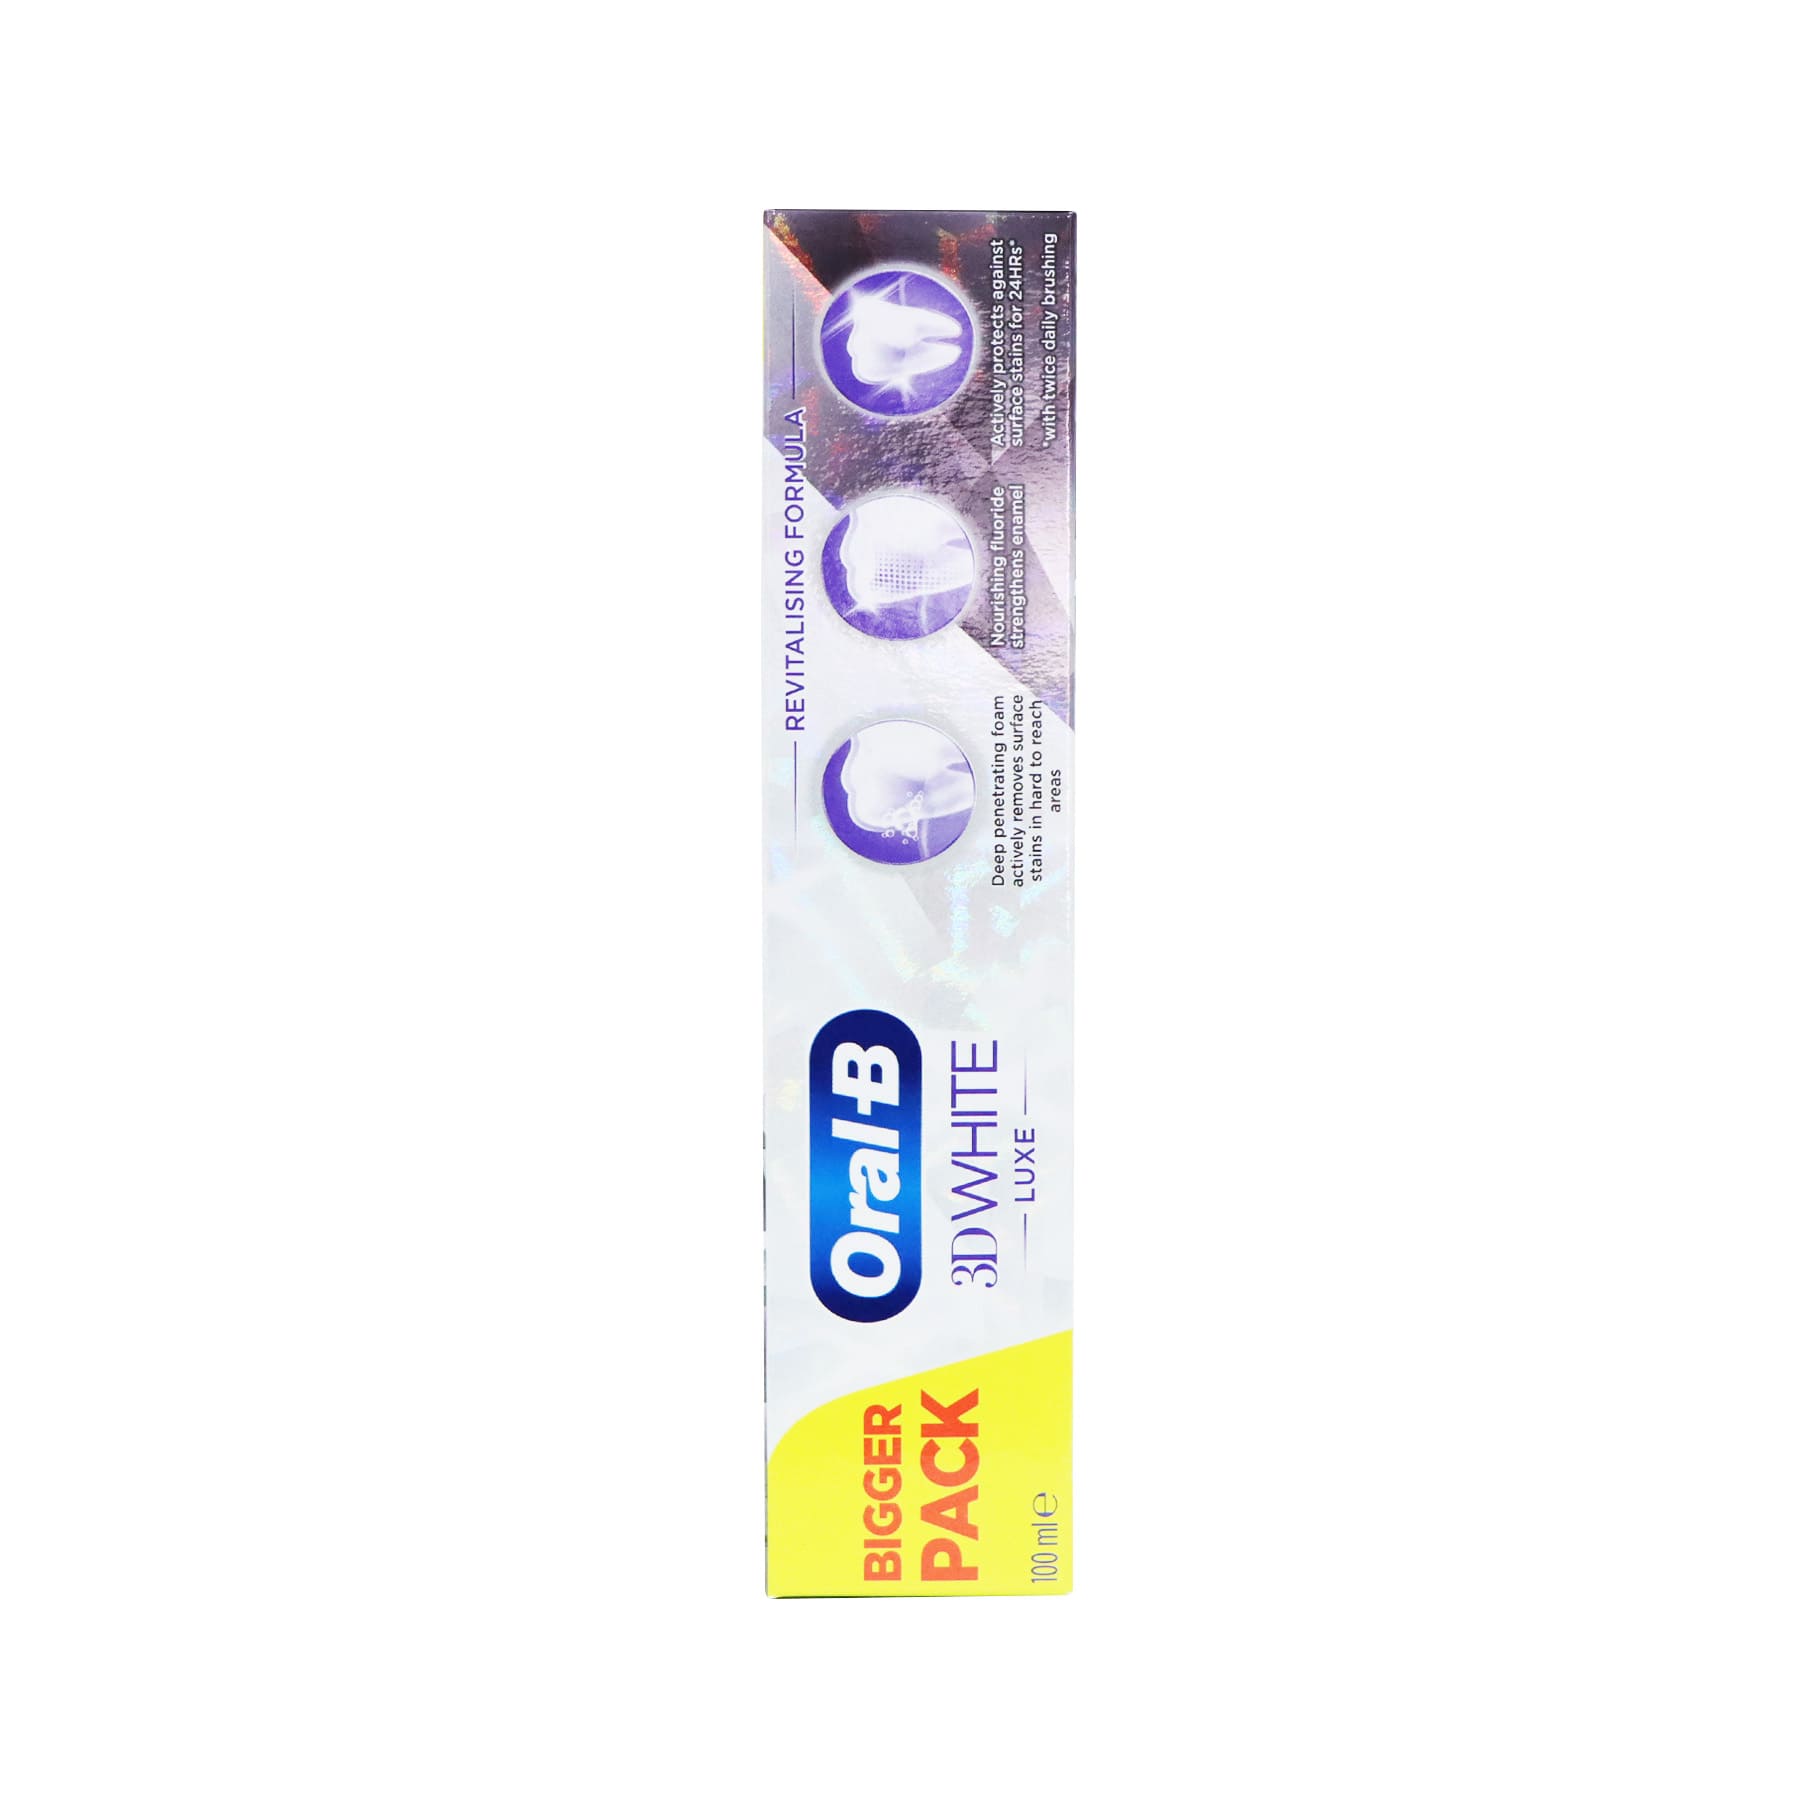 Oral-B 3D White Luxe Perfection Charcoal Toothpaste 100ml